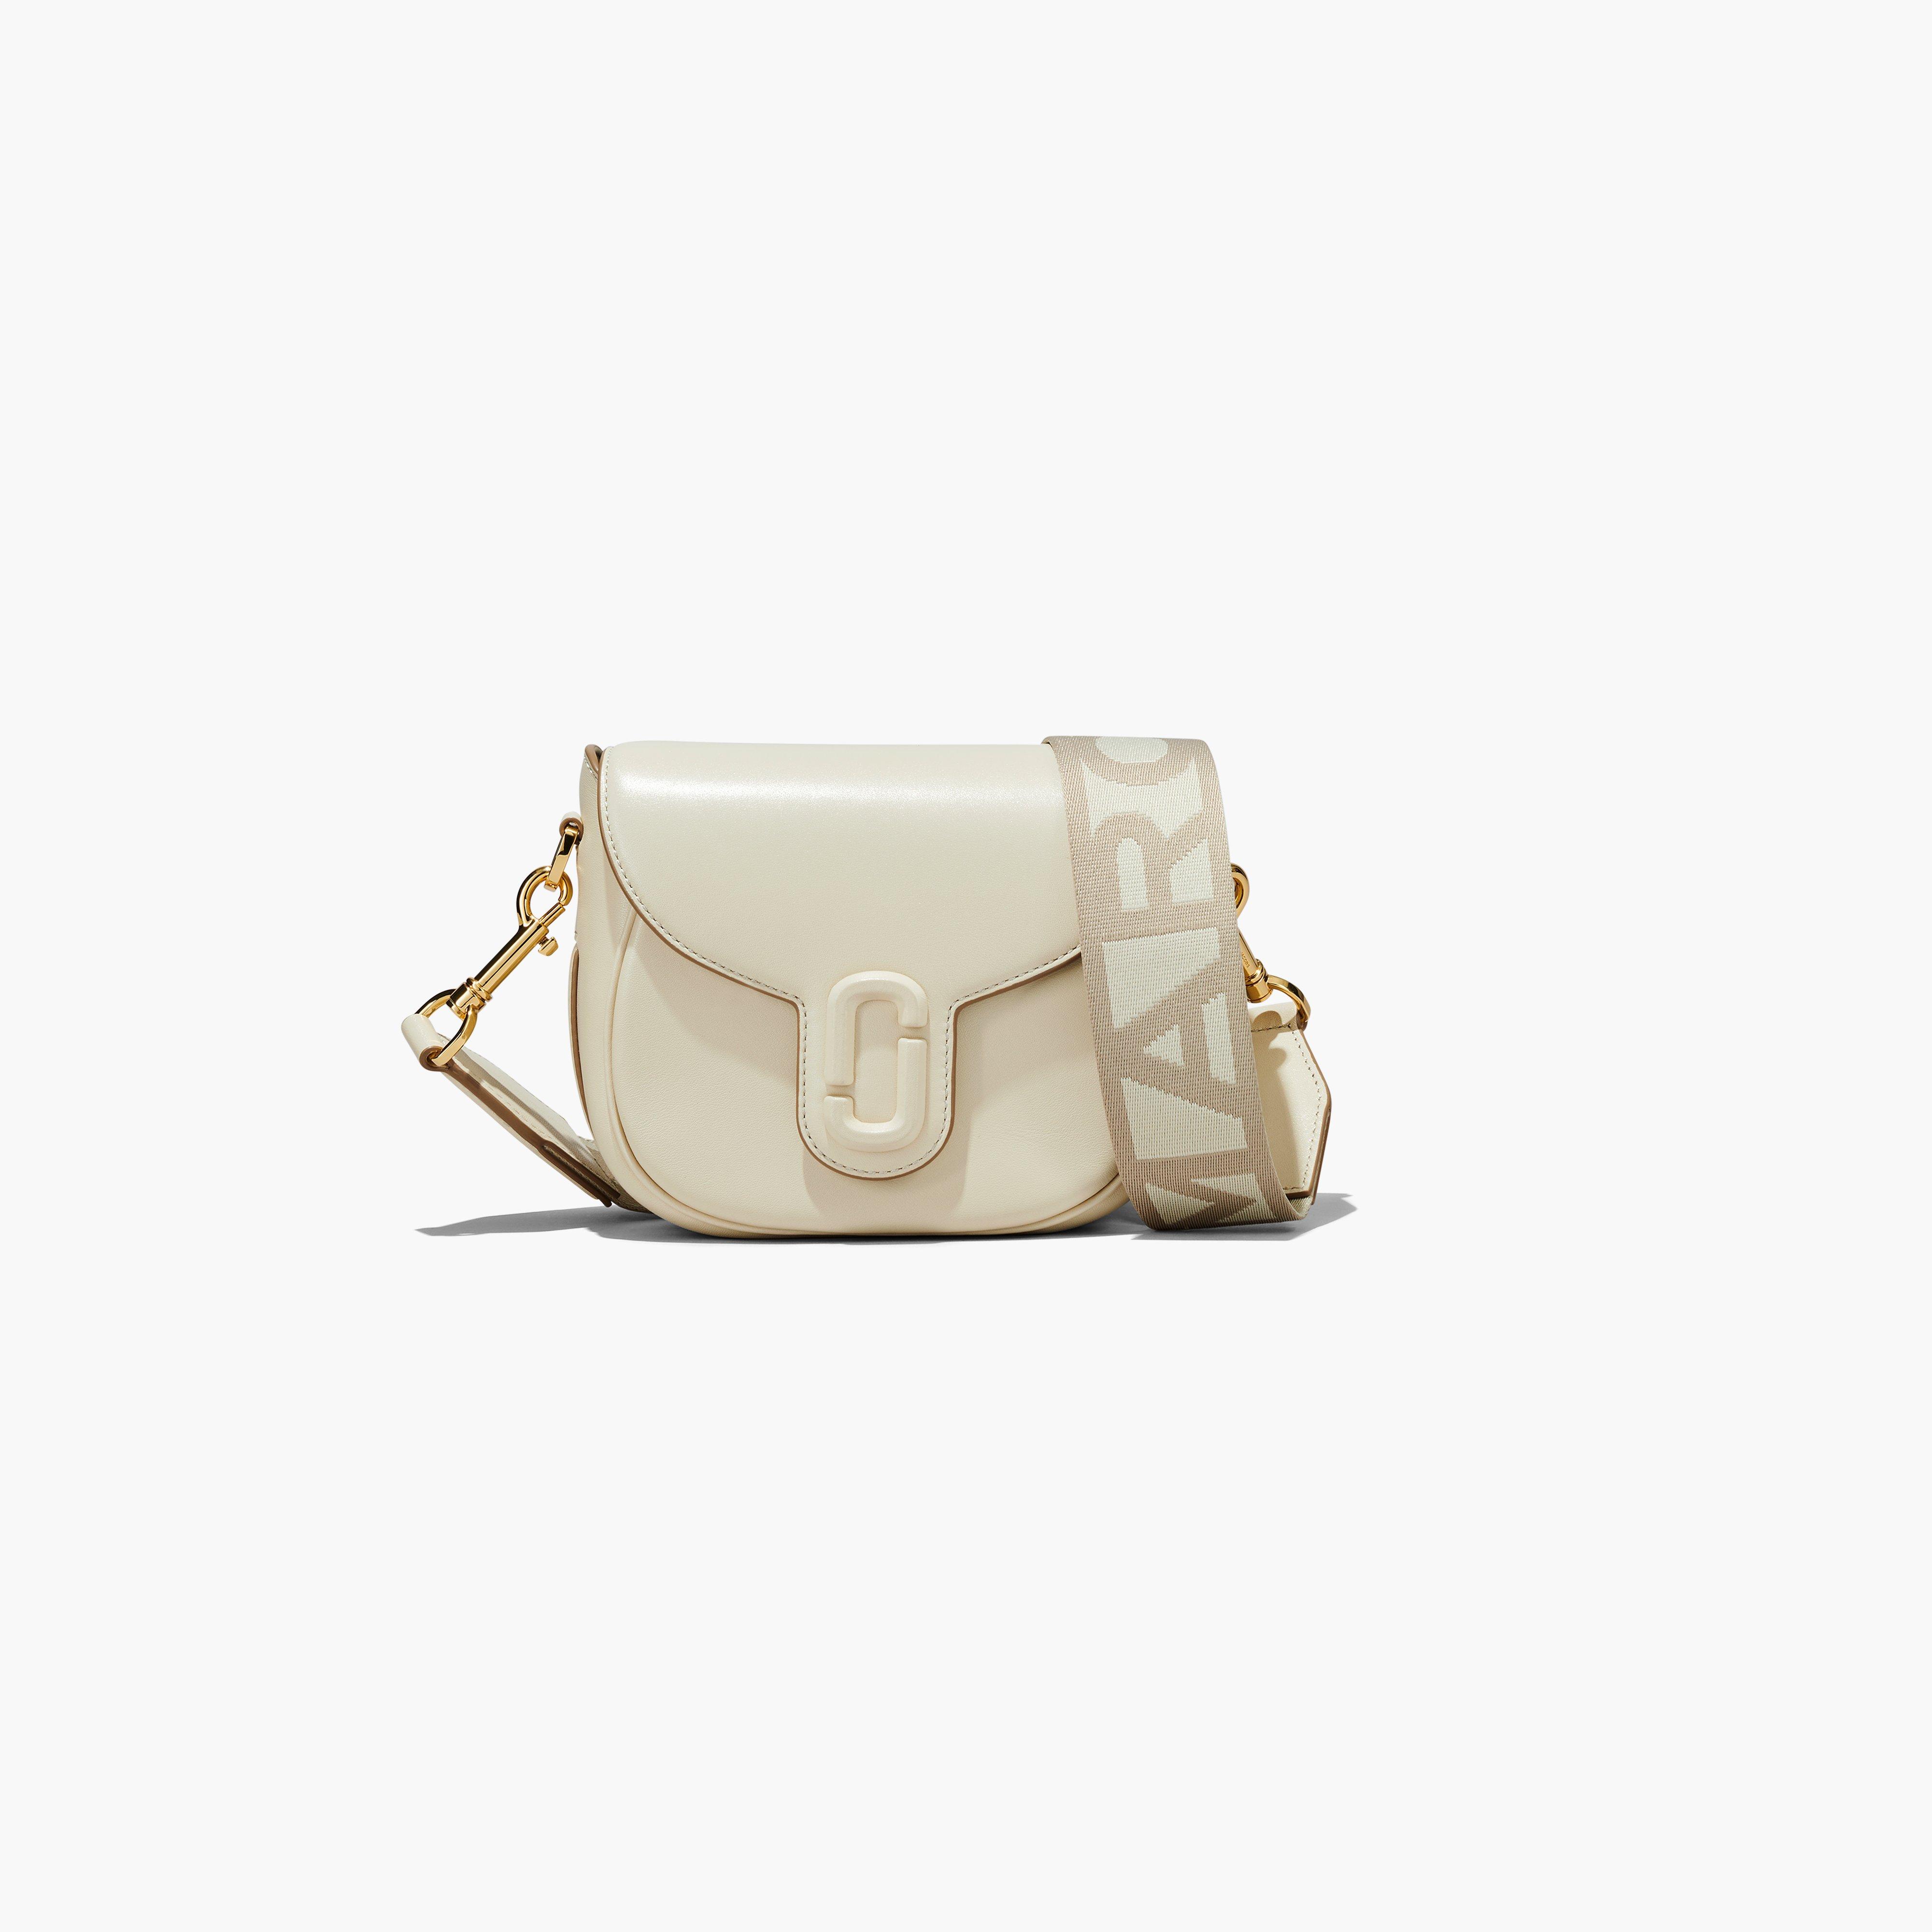 Marc by Marc jacobs The J Marc Small Saddle Bag,CLOUD WHITE